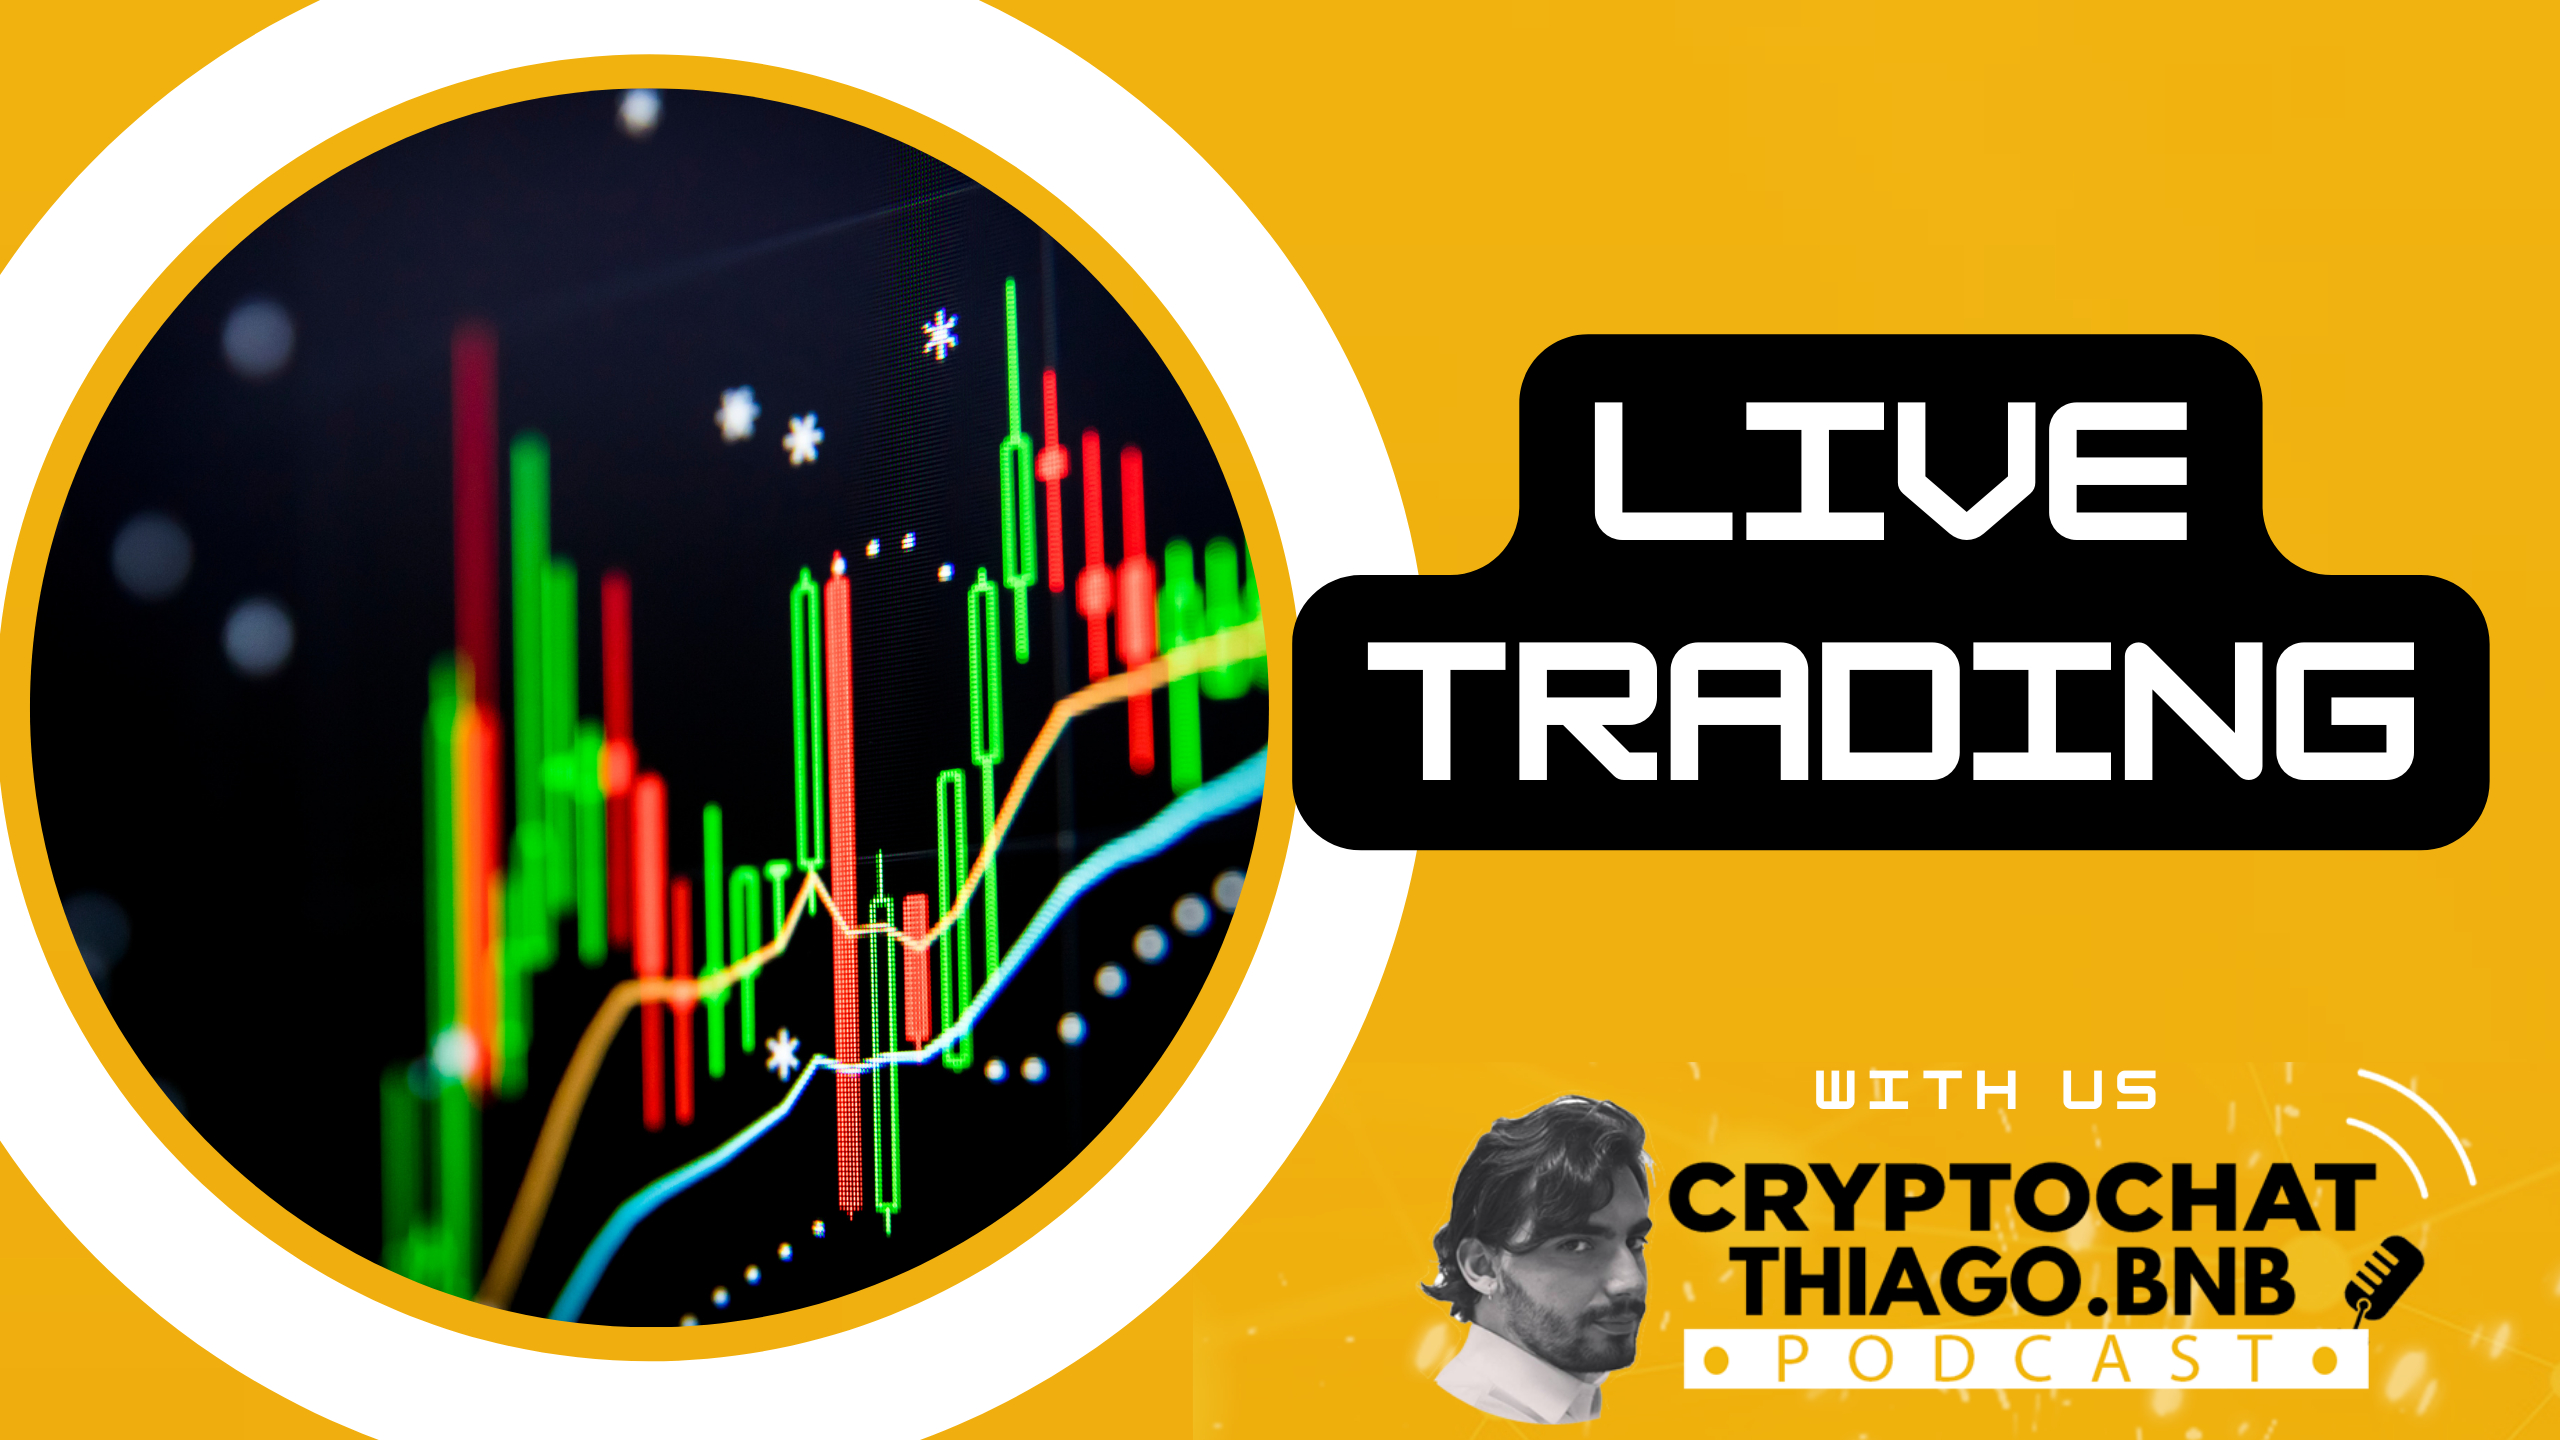 LIVE TRADING - GOLD SPOT